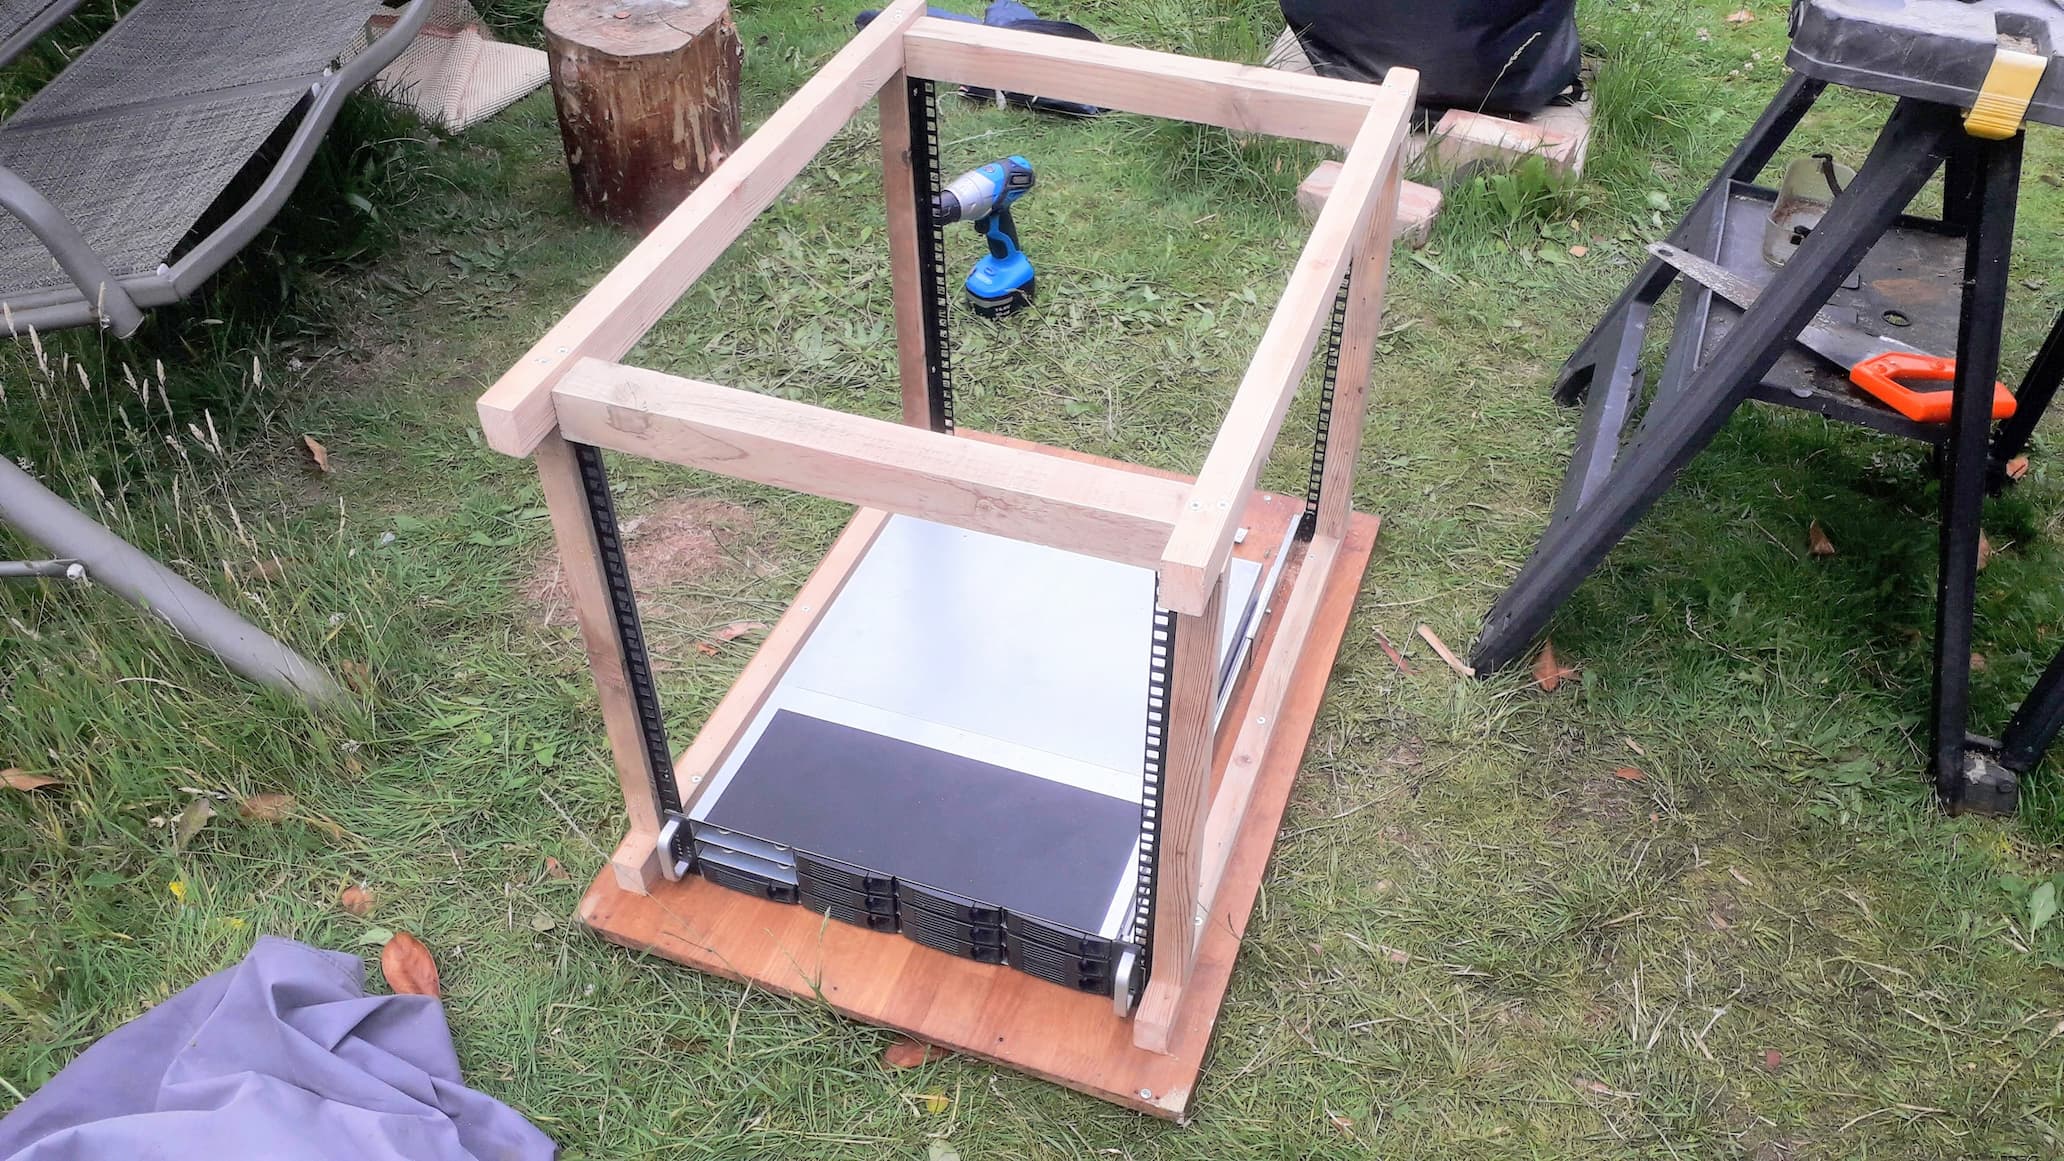 A picture showing the frame being completed with the server mounted inside using rails